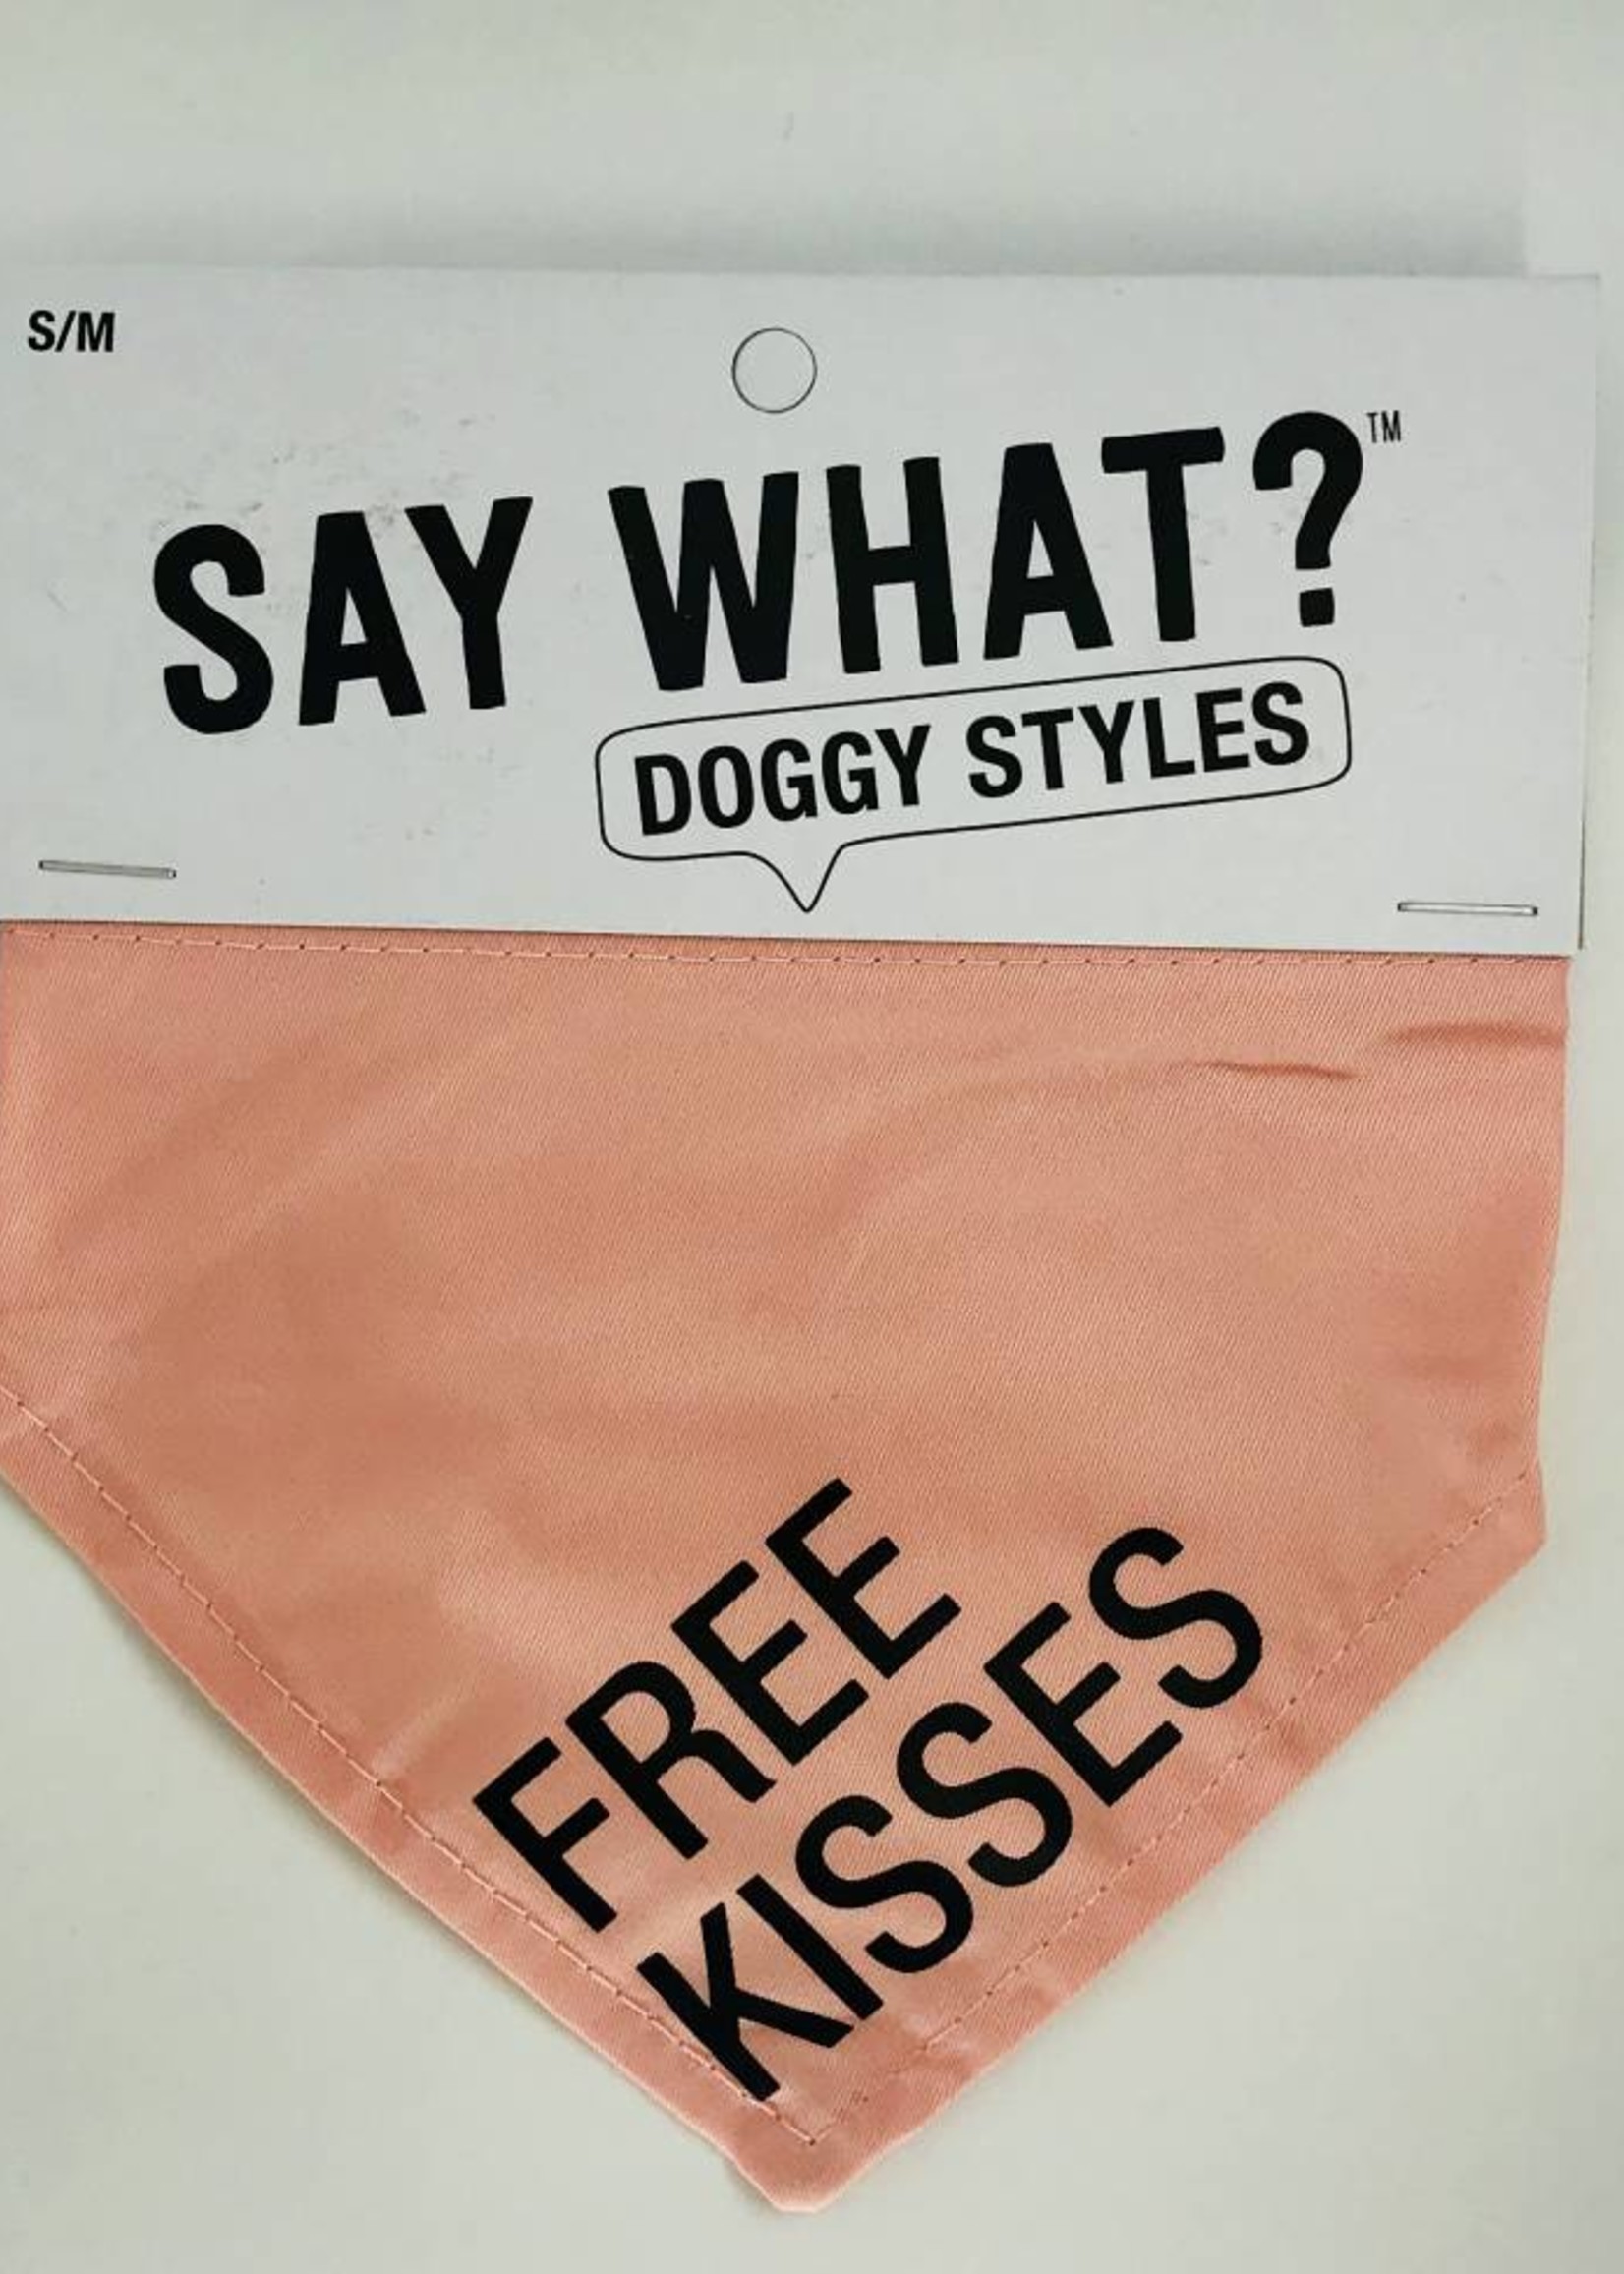 About Face Designs Dog Bandana Free Kisses-small